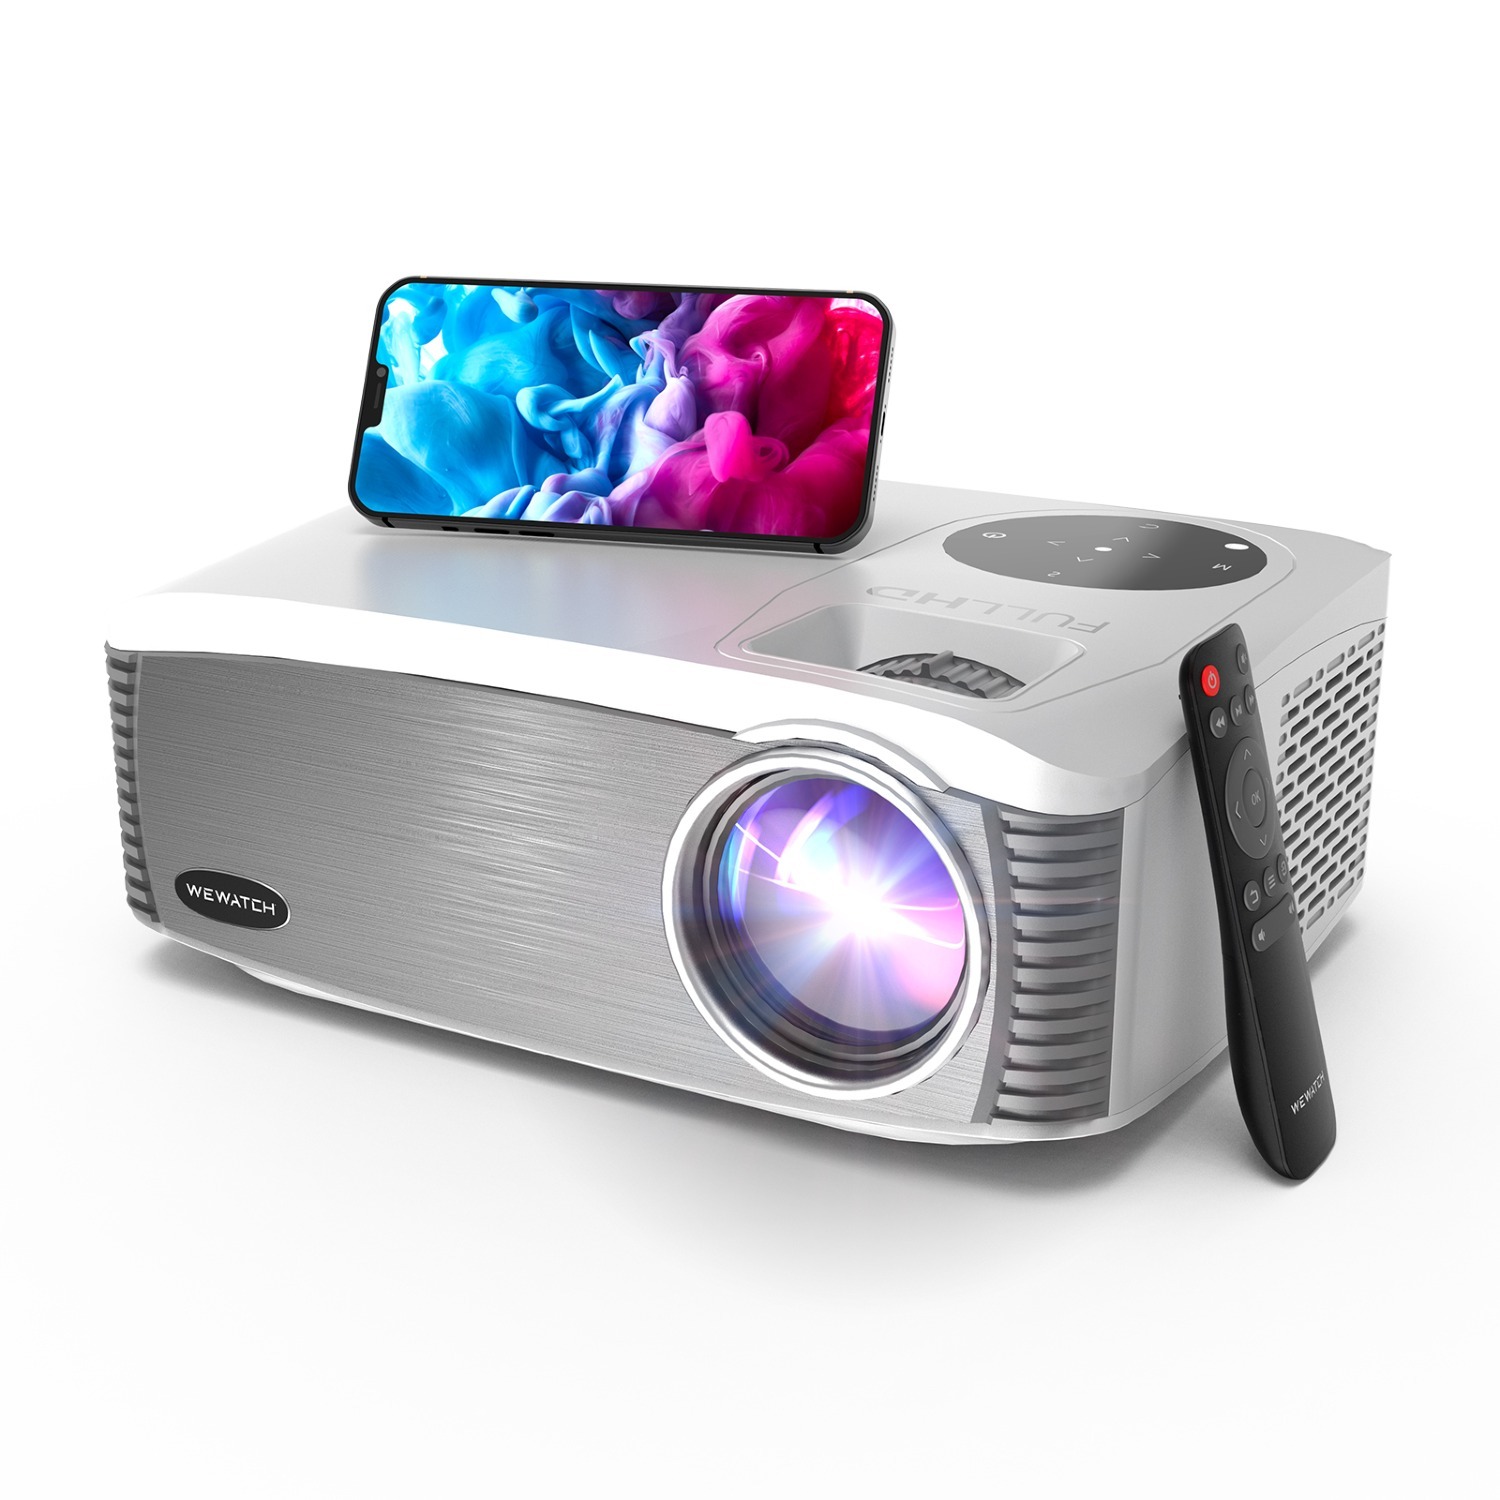 WEWATCH V70 Pro 500 ANSI Native 1080P 4K 5G WiFi Bluetooth Home Theater Projector with Built in Speaker & Mirror Cast $120 + Free Shipping